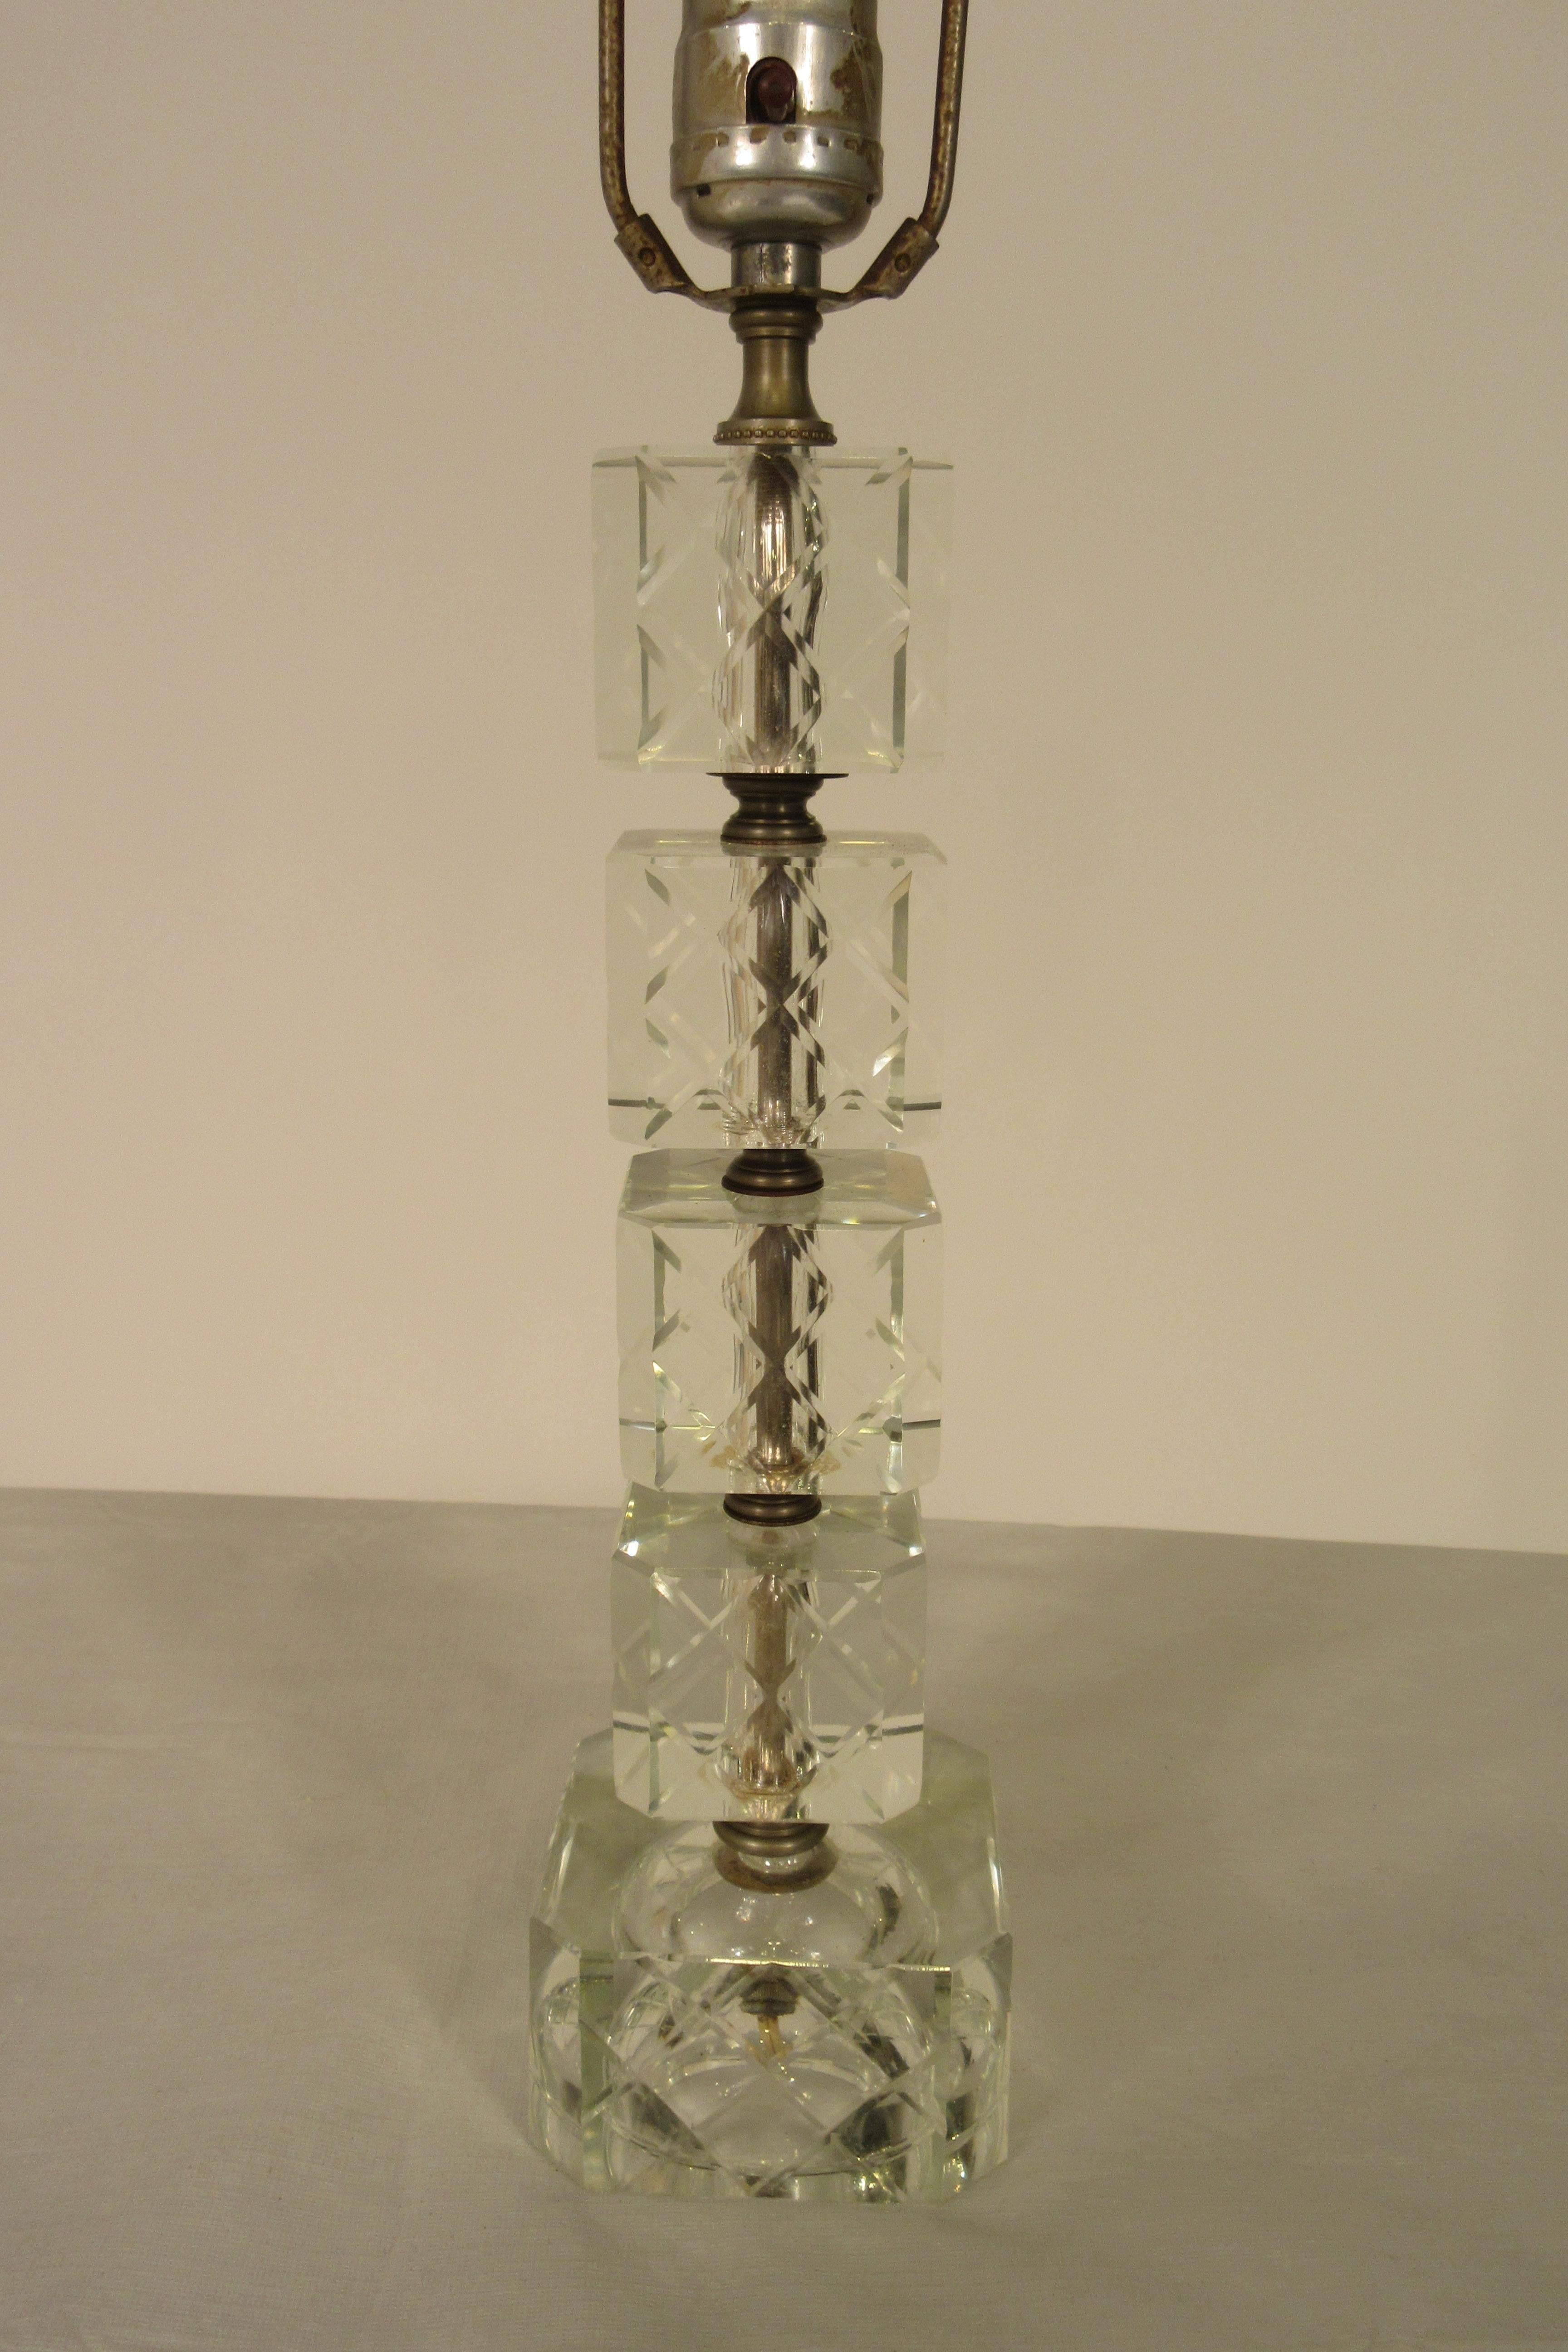 Pair of 1940s stacked etched glass cube lamps with glass finials. Needs rewiring.